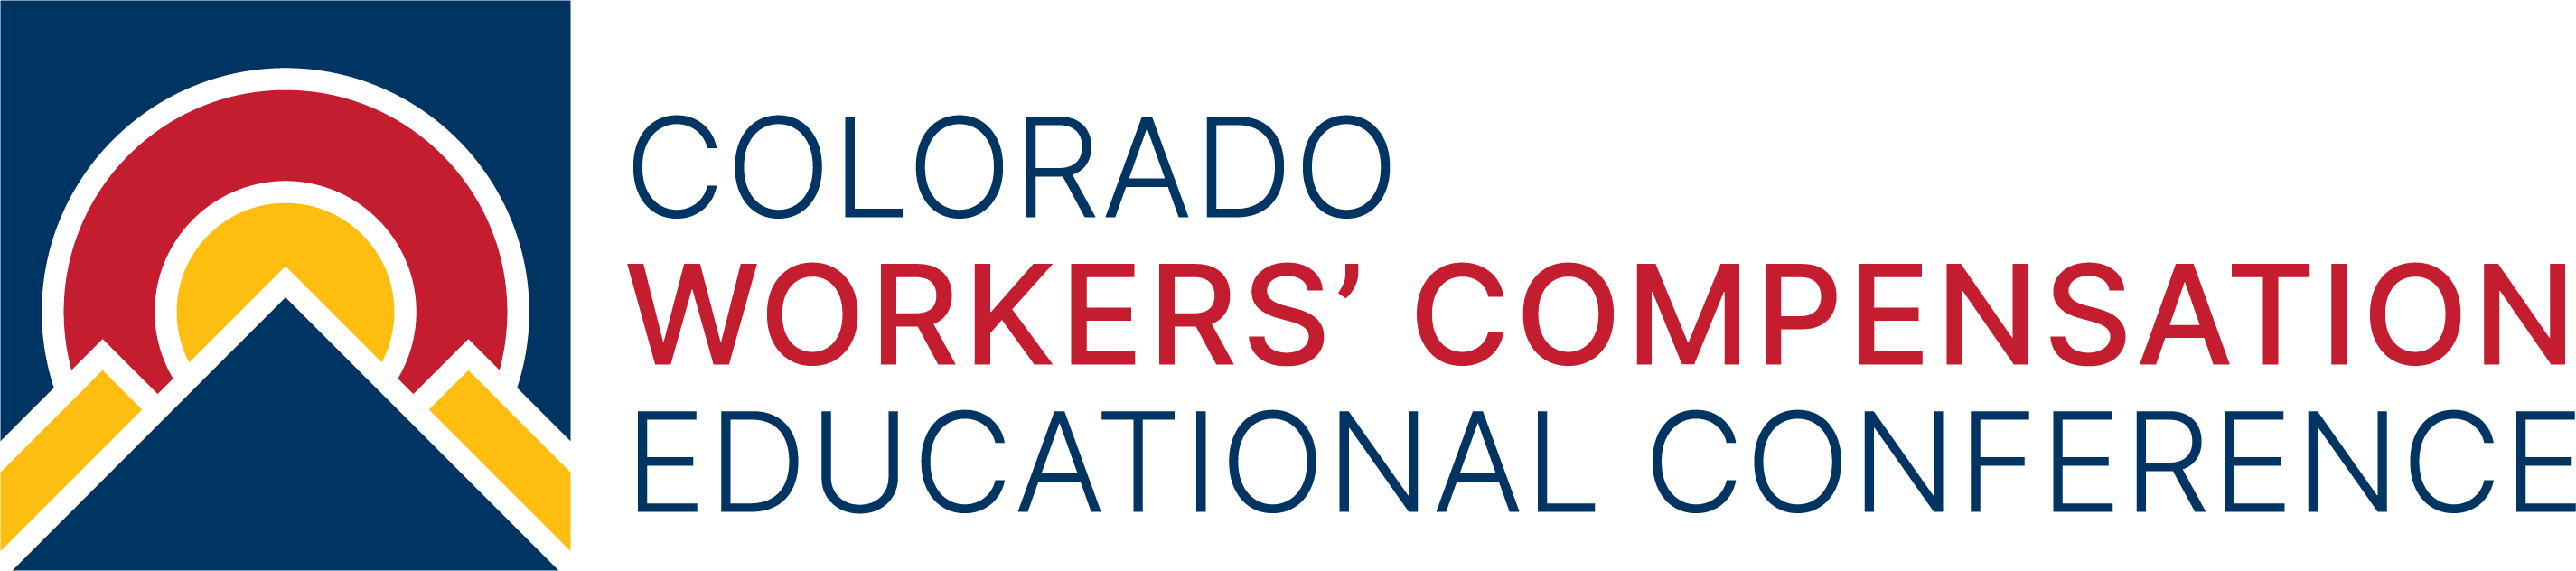 Colorado Workers' Compensation Educational Conference